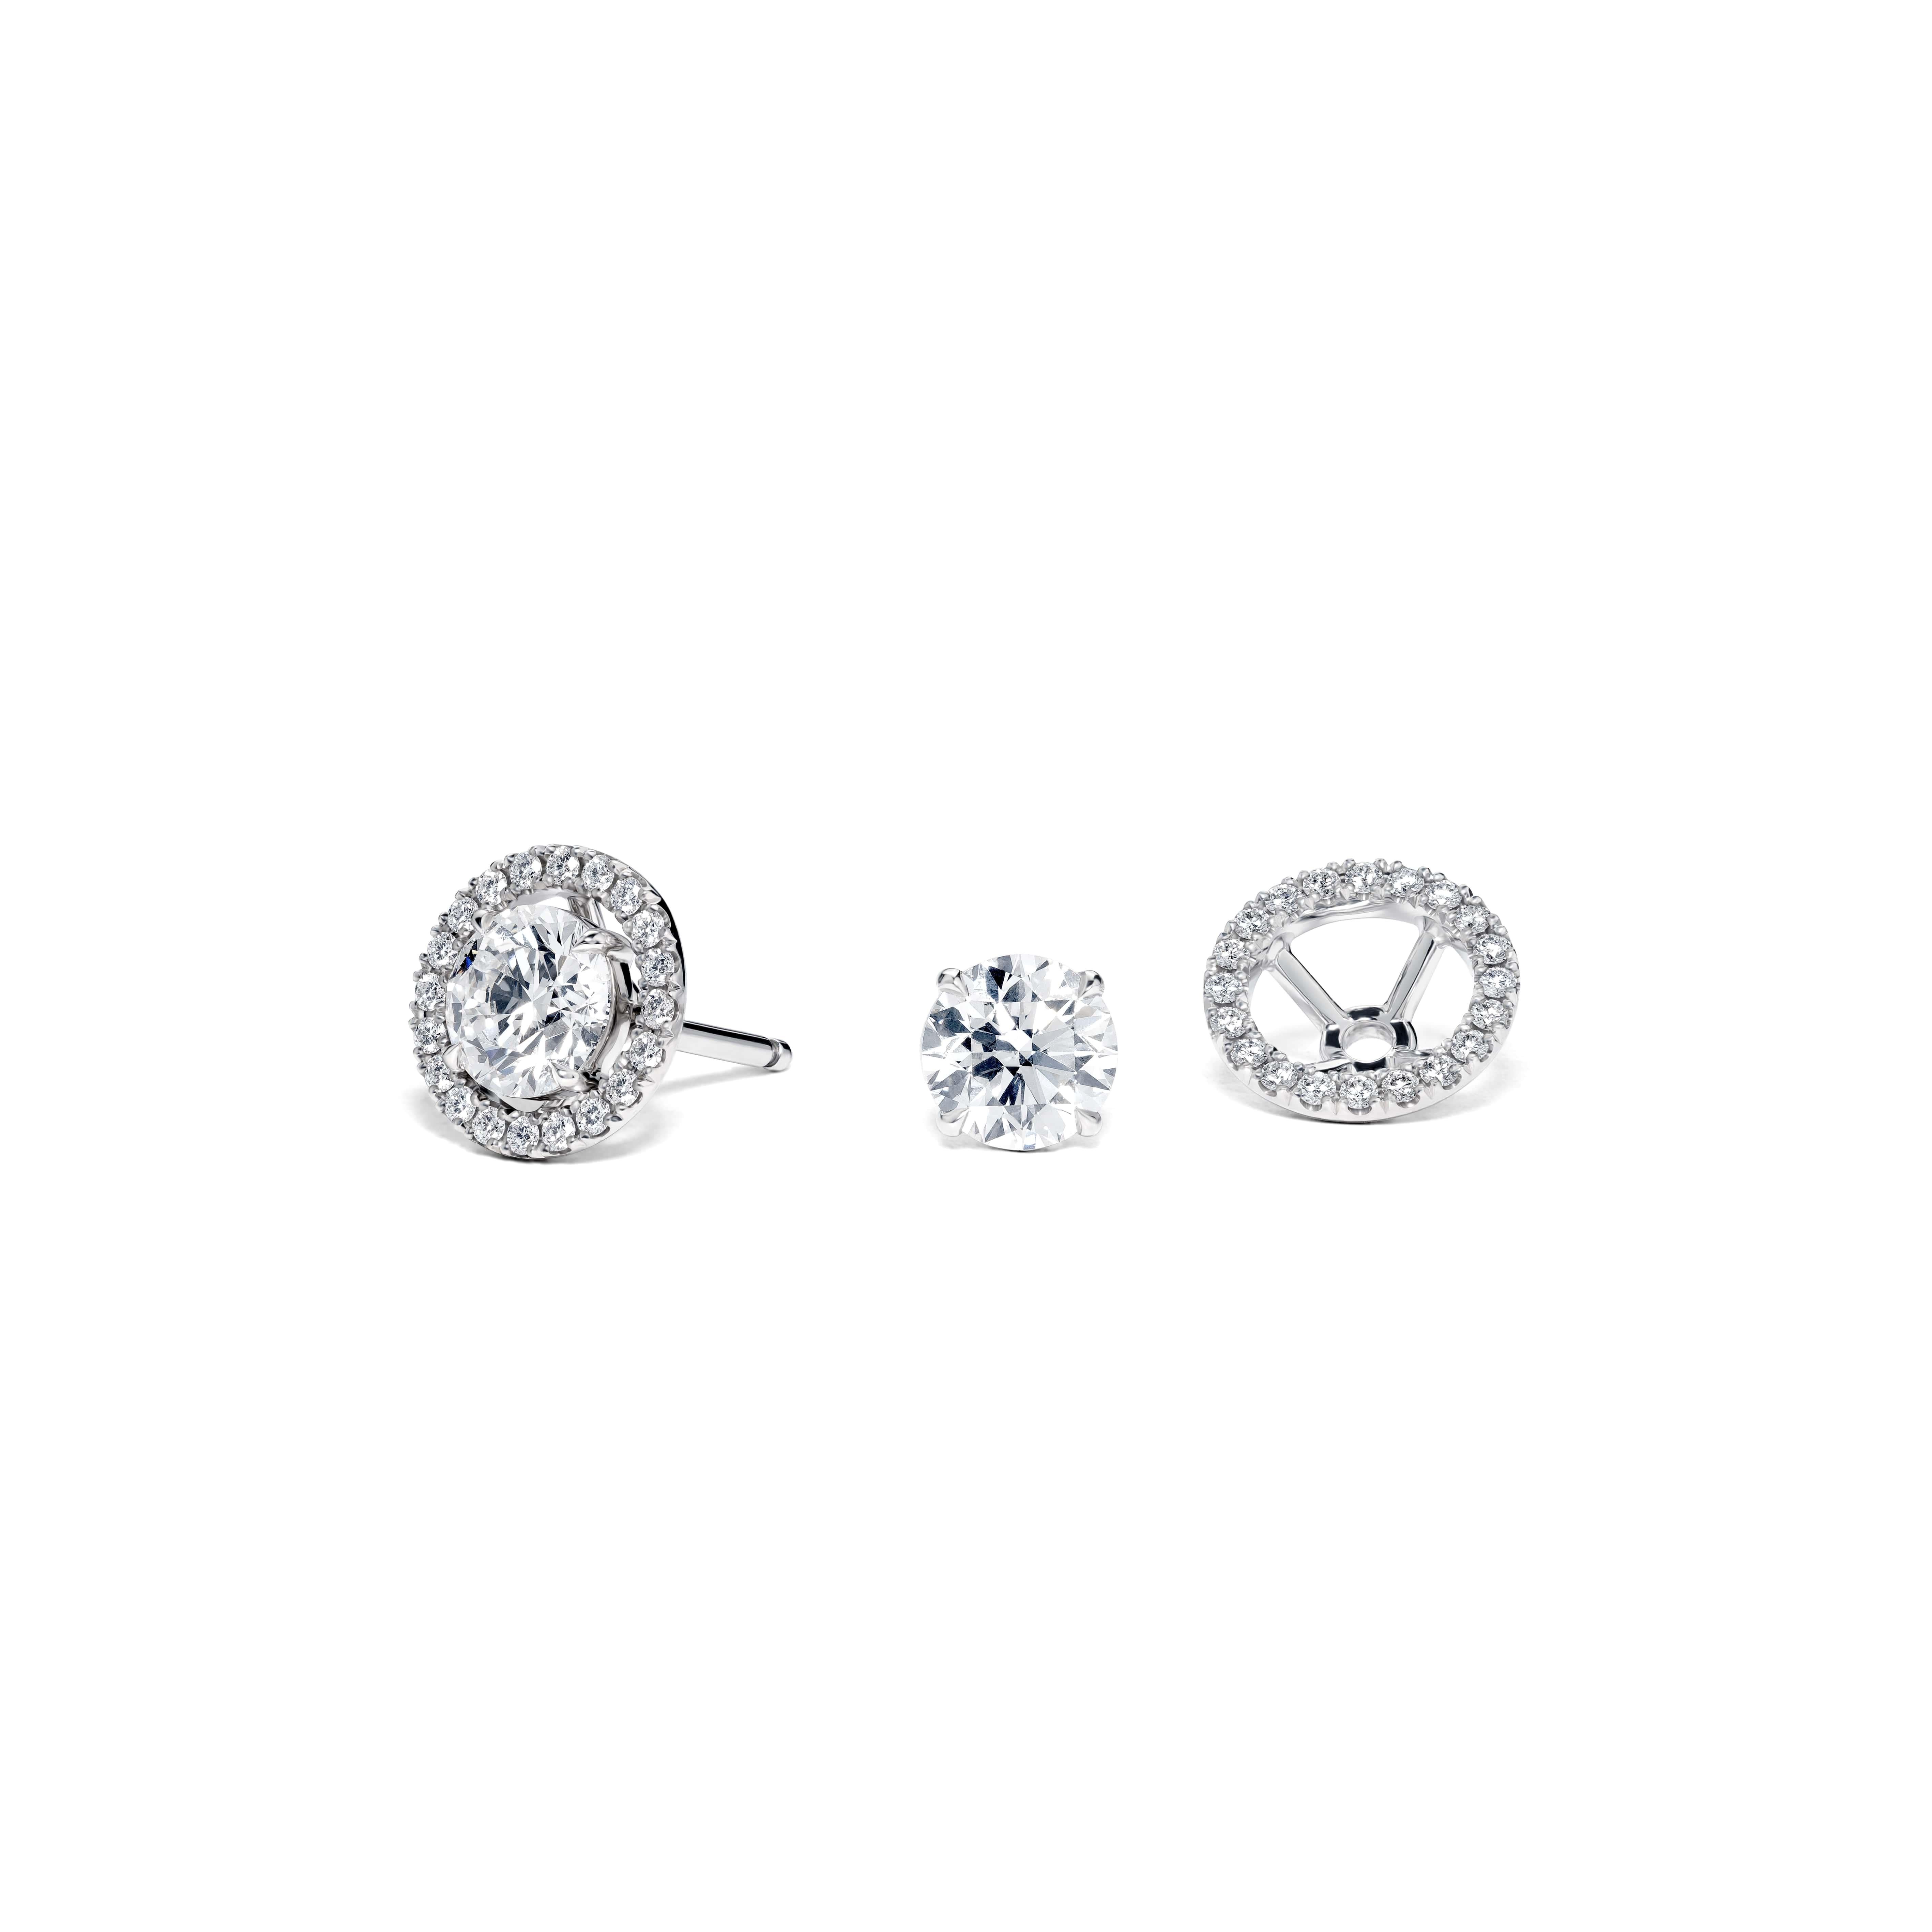 Crafted with meticulous attention to detail, these earrings feature a dazzling round brilliant diamond at the centre, with a detachable surround design. The central diamond is surrounded by a delicate halo of smaller diamonds, adding an extra layer